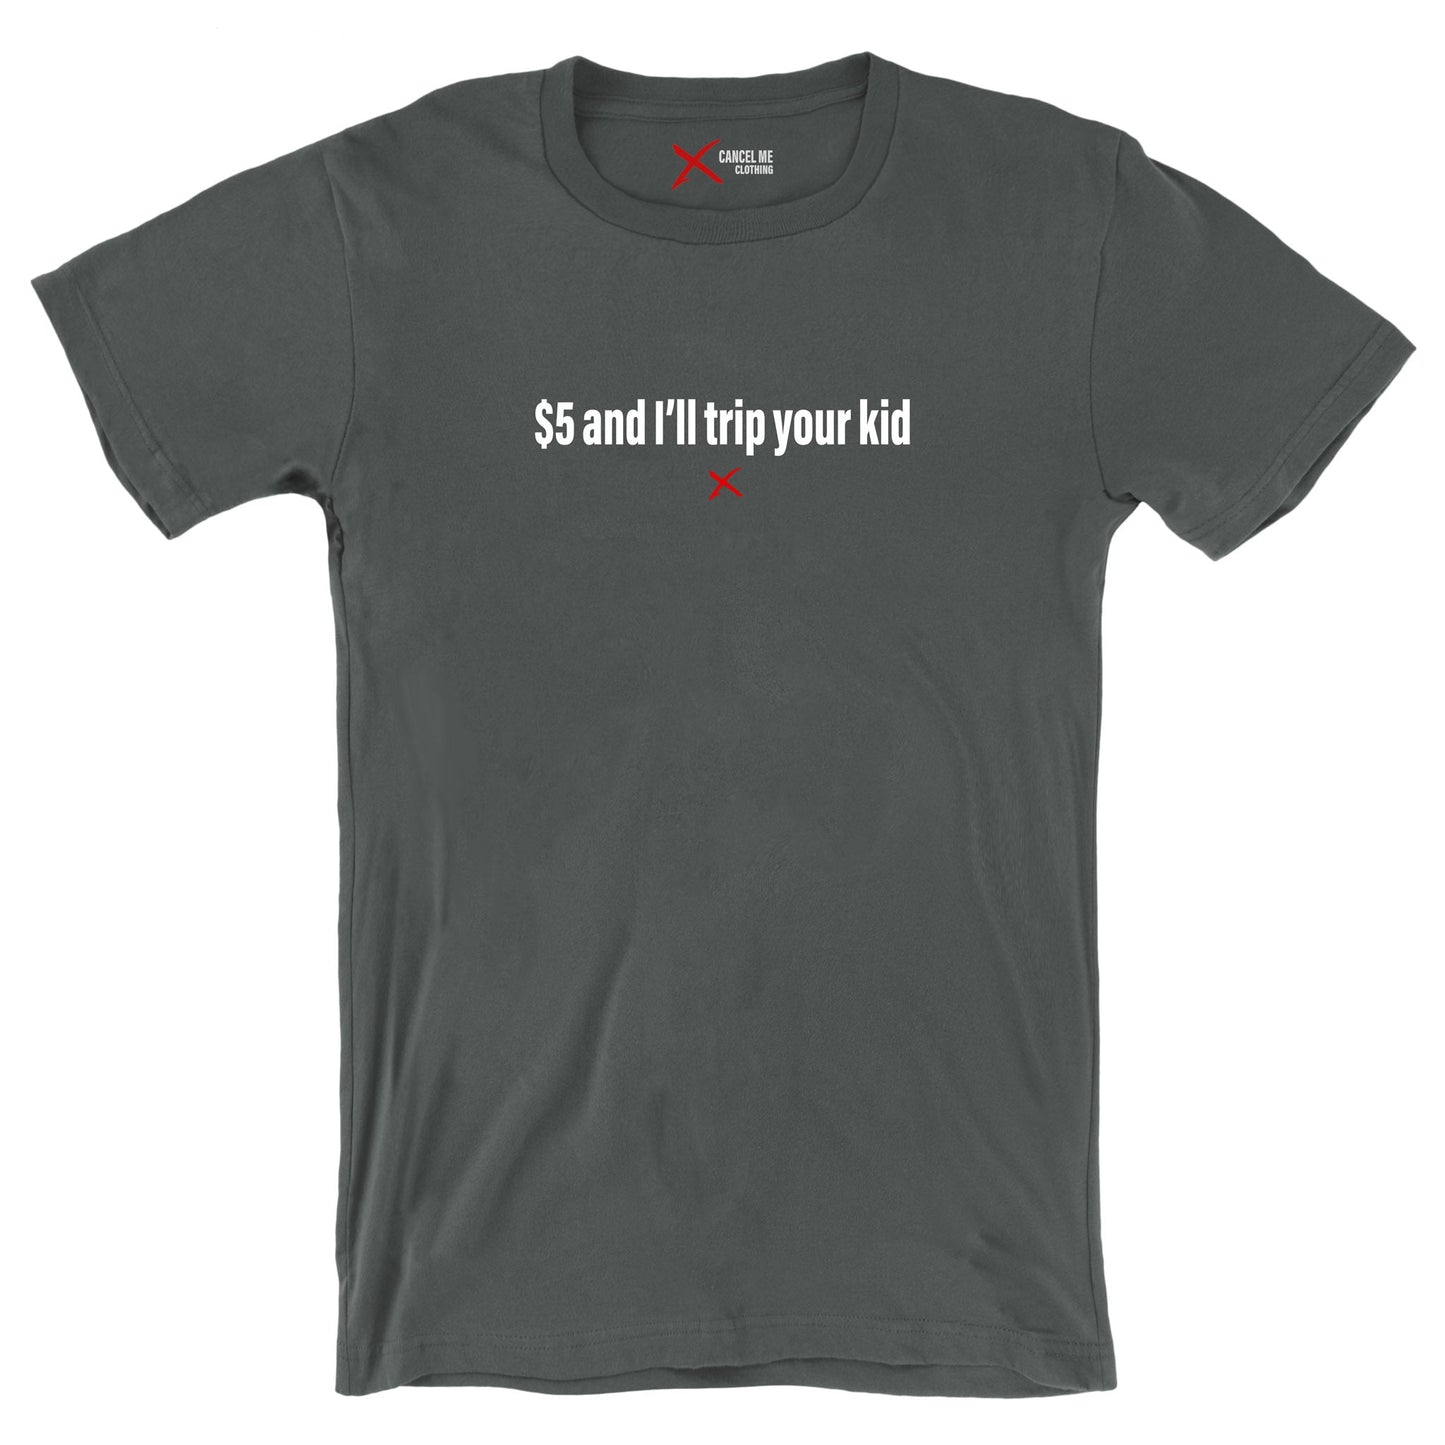 $5 and I'll trip your kid - Shirt